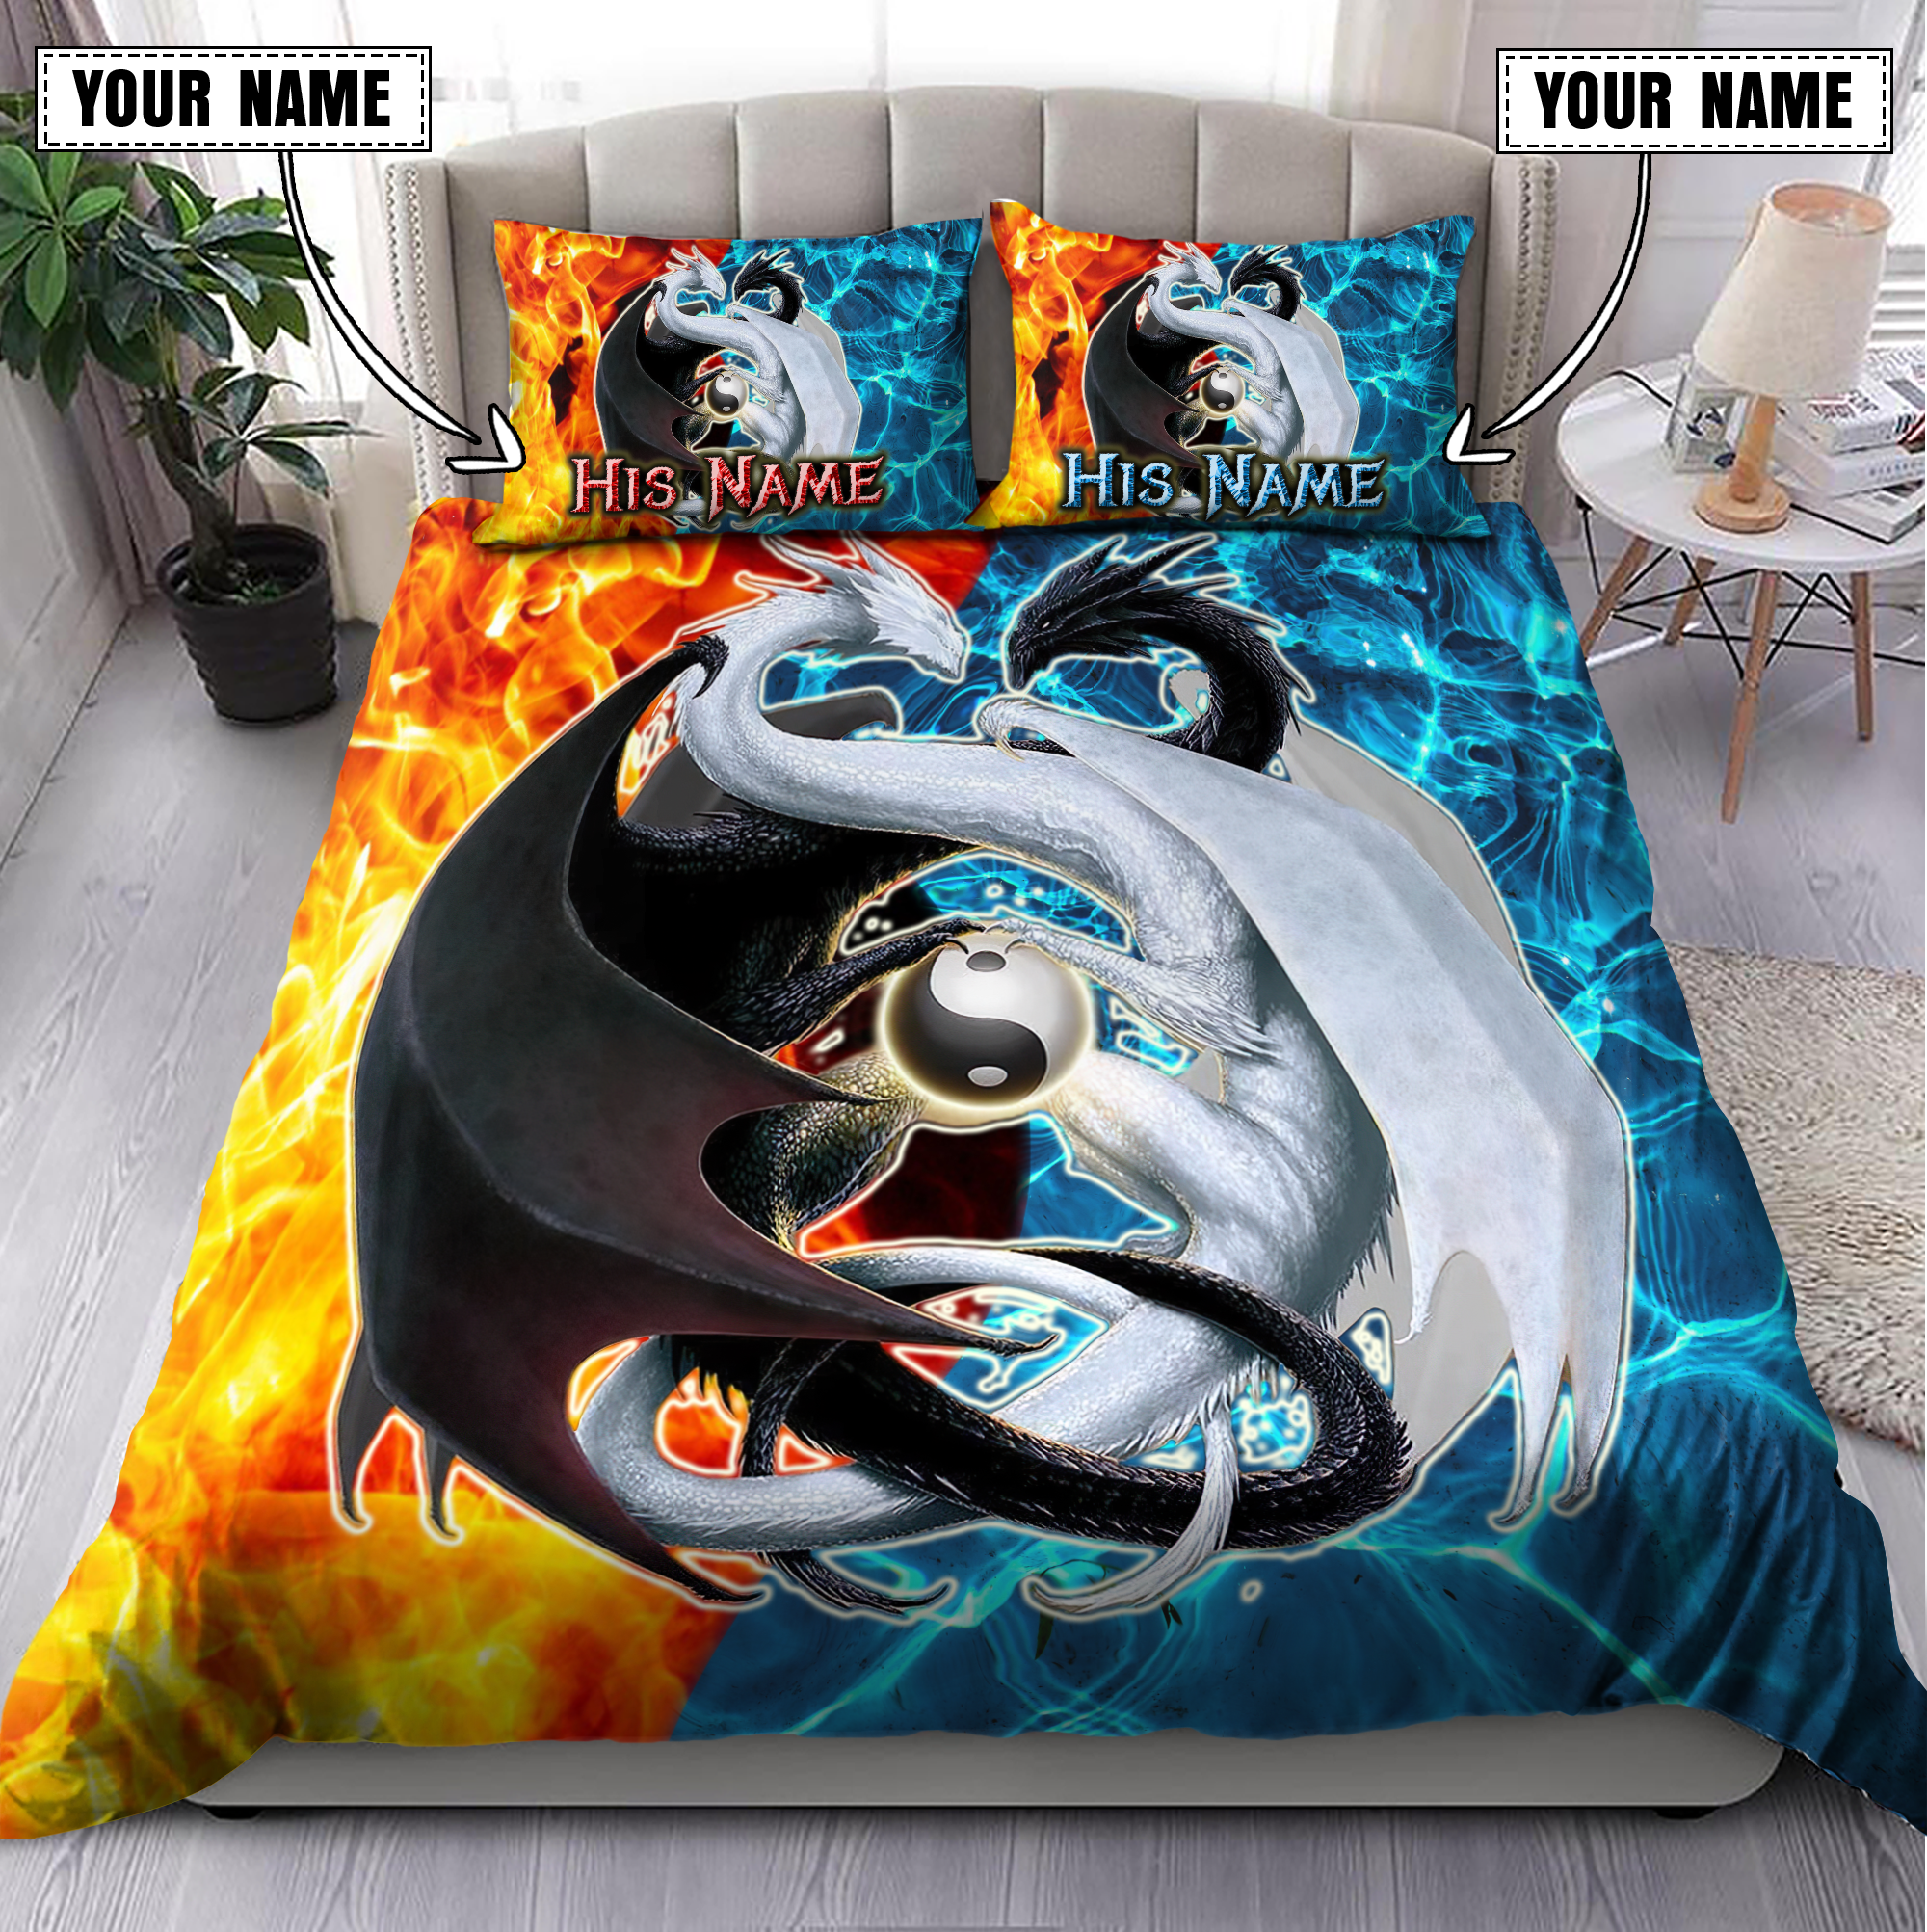 Couple Ice And Fire Dragon Custom Name Quilt Bedding Set